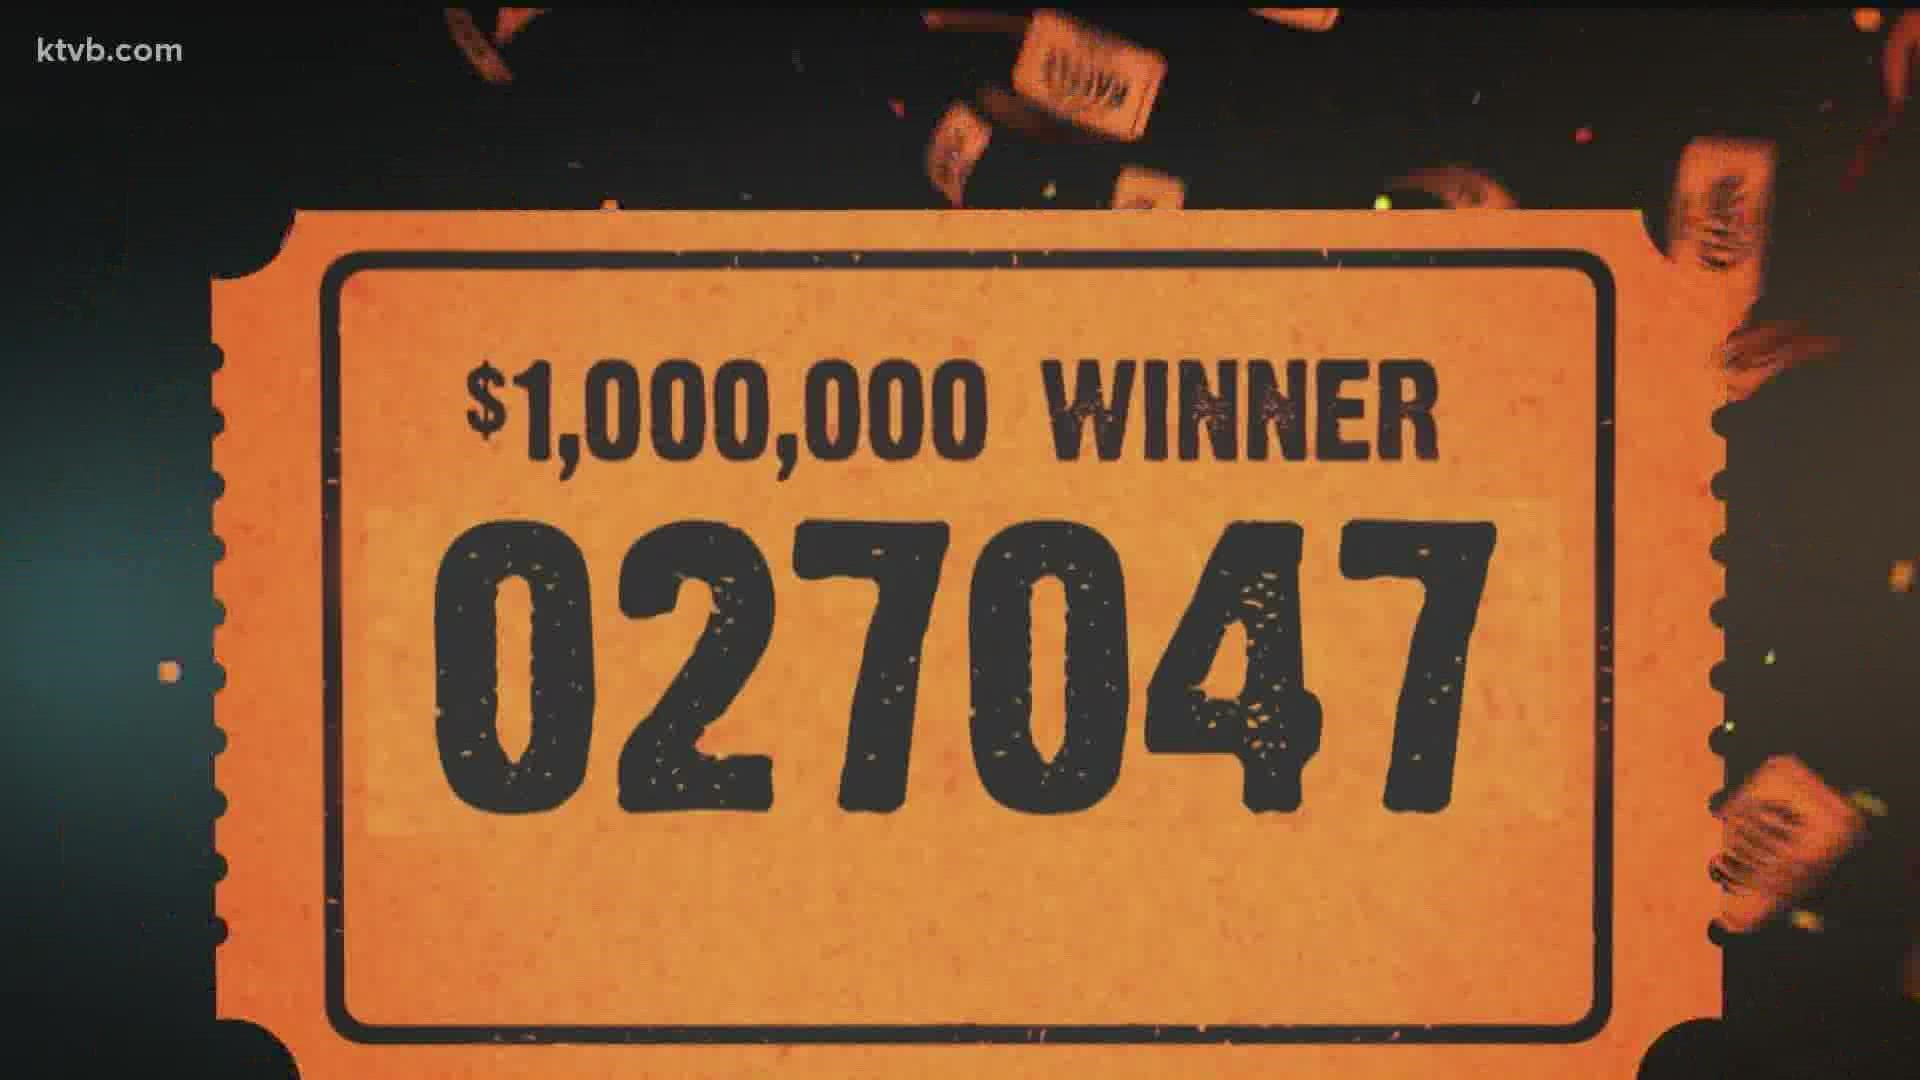 According to the Idaho Lottery, the winning ticket was sold at a retail location in Blaine County. The $1 million winning number is 027047.